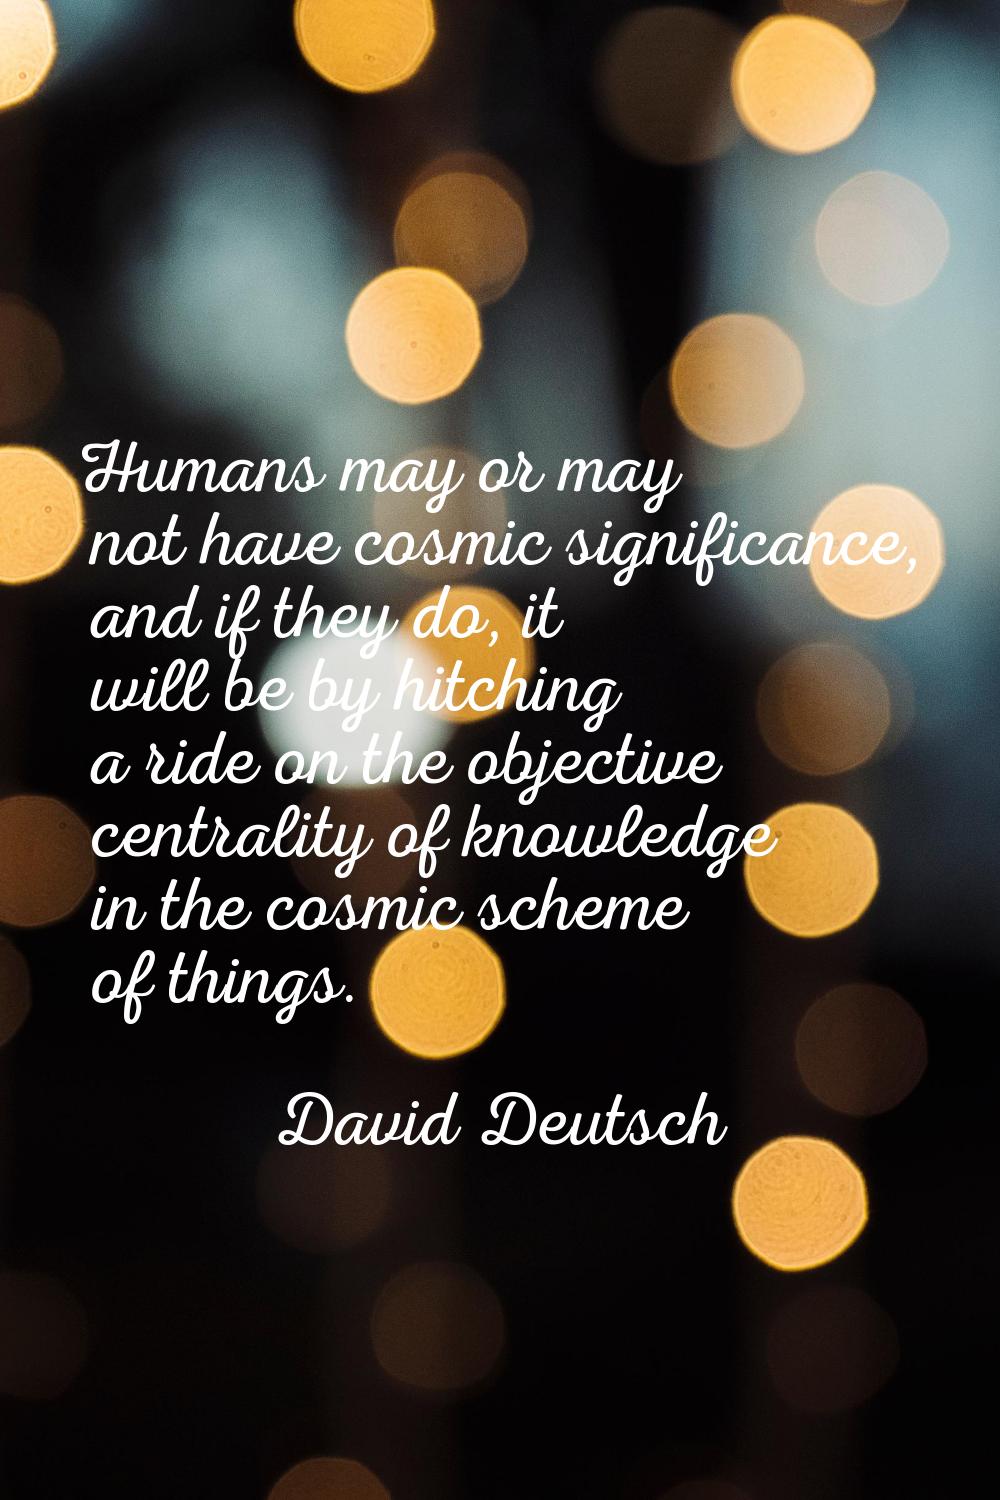 Humans may or may not have cosmic significance, and if they do, it will be by hitching a ride on th